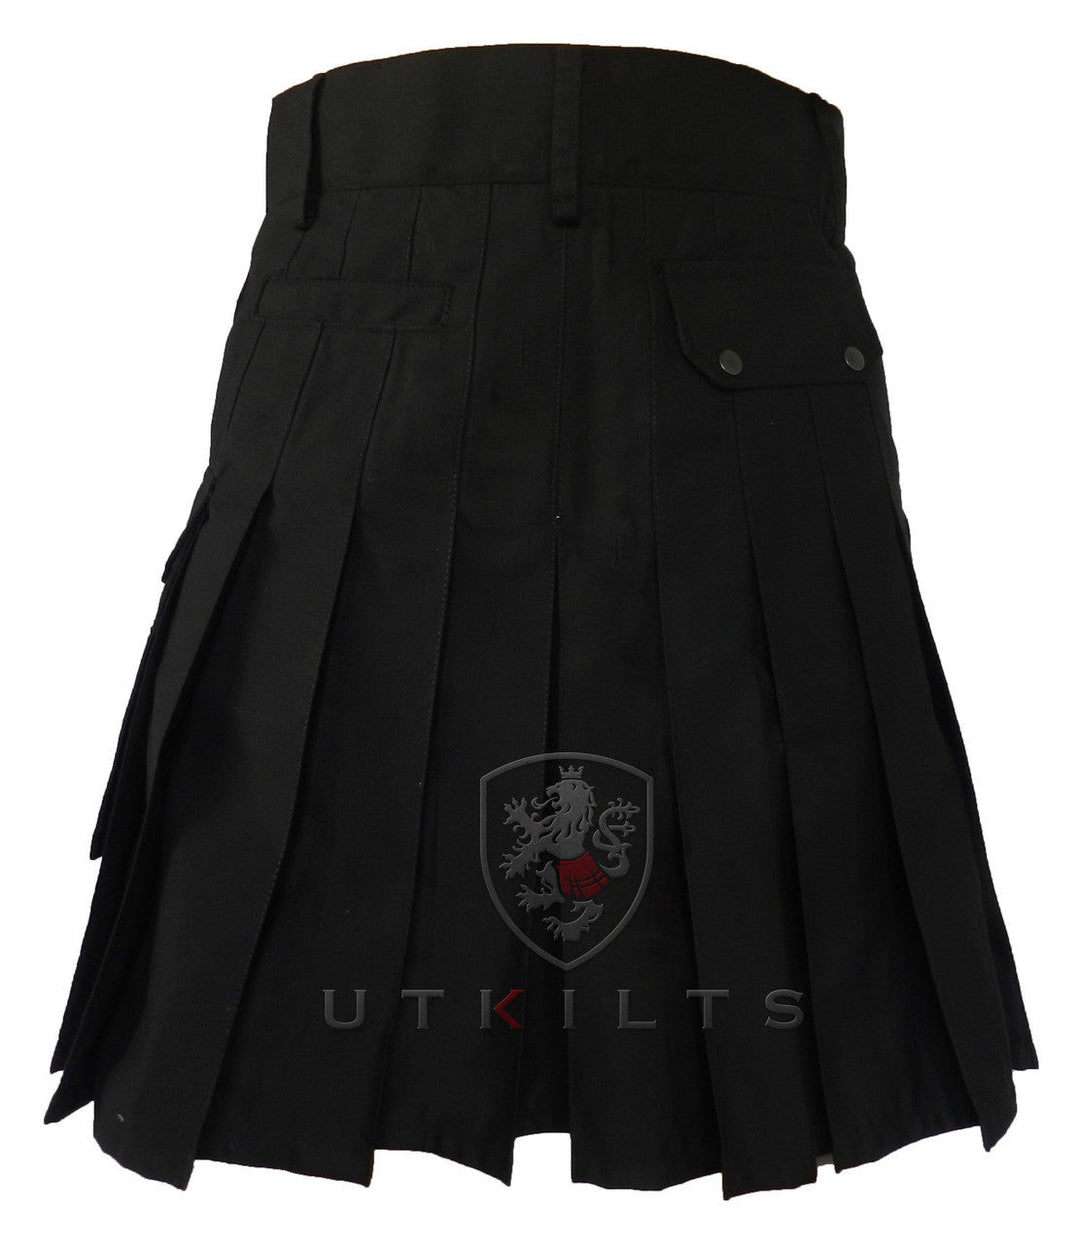 CLEARANCE! Ultimate Black Ripstop Utility Kilt with Comfort Waist - 52x22